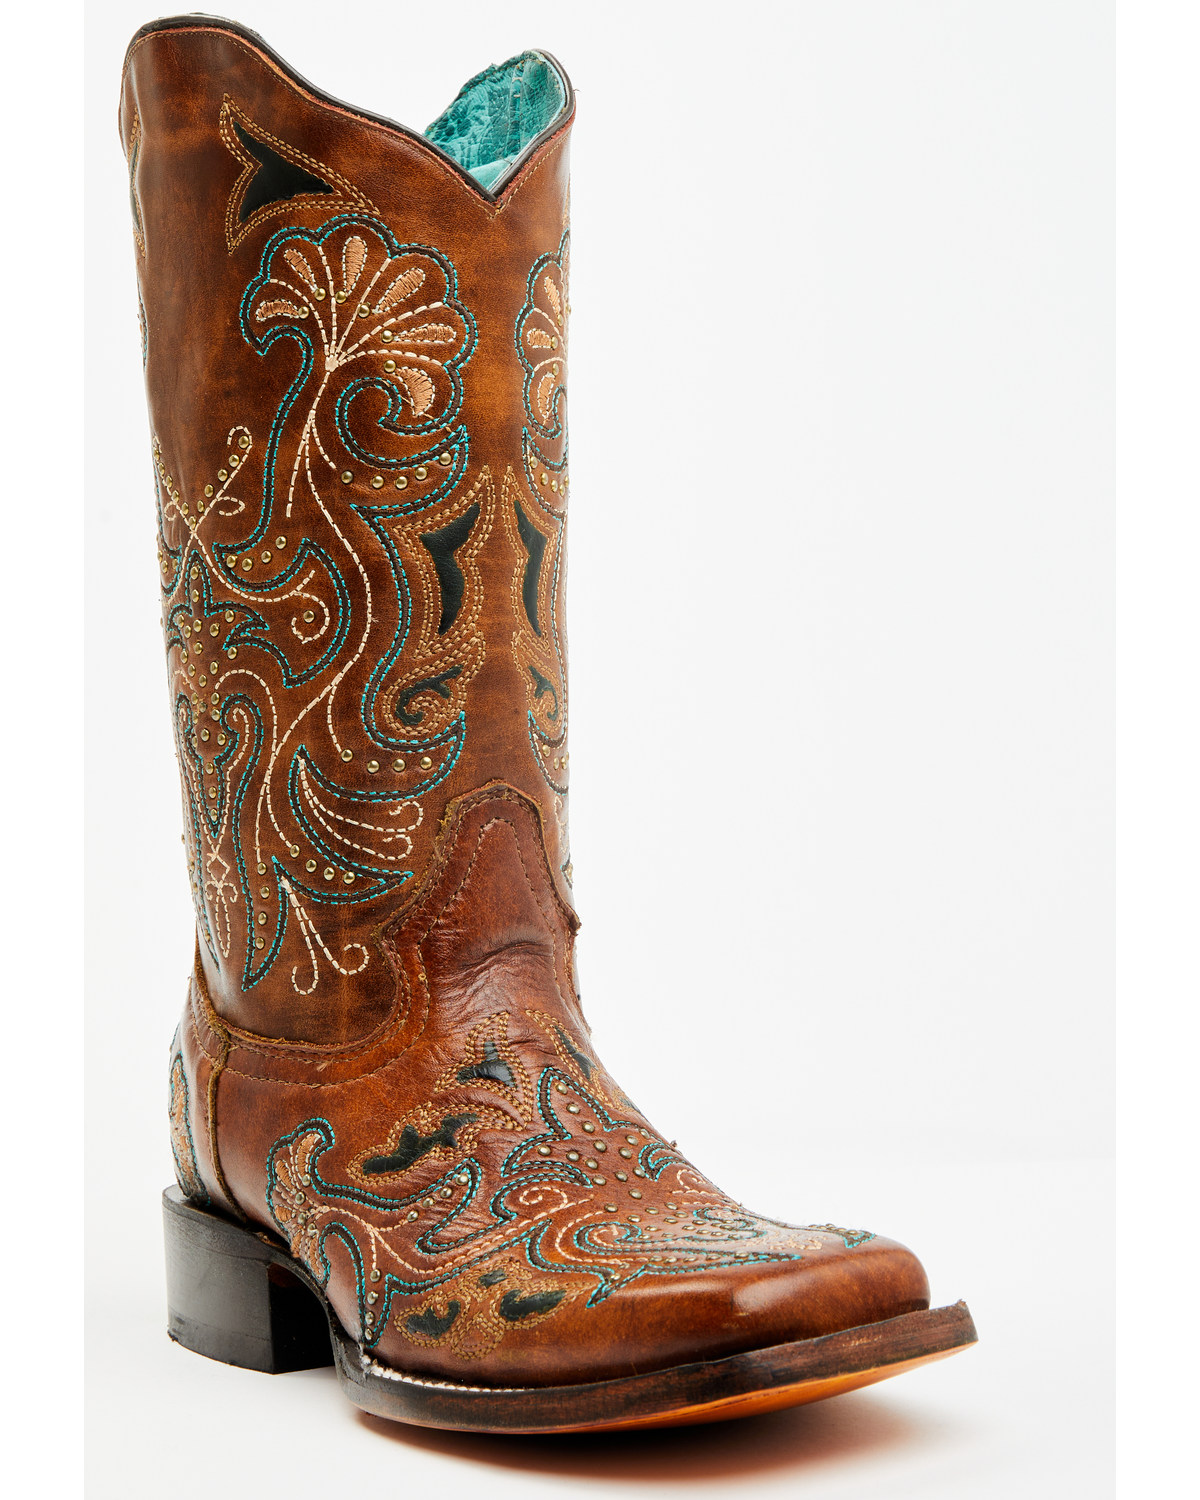 Corral Women's Embroidered Western Boots - Broad Square Toe